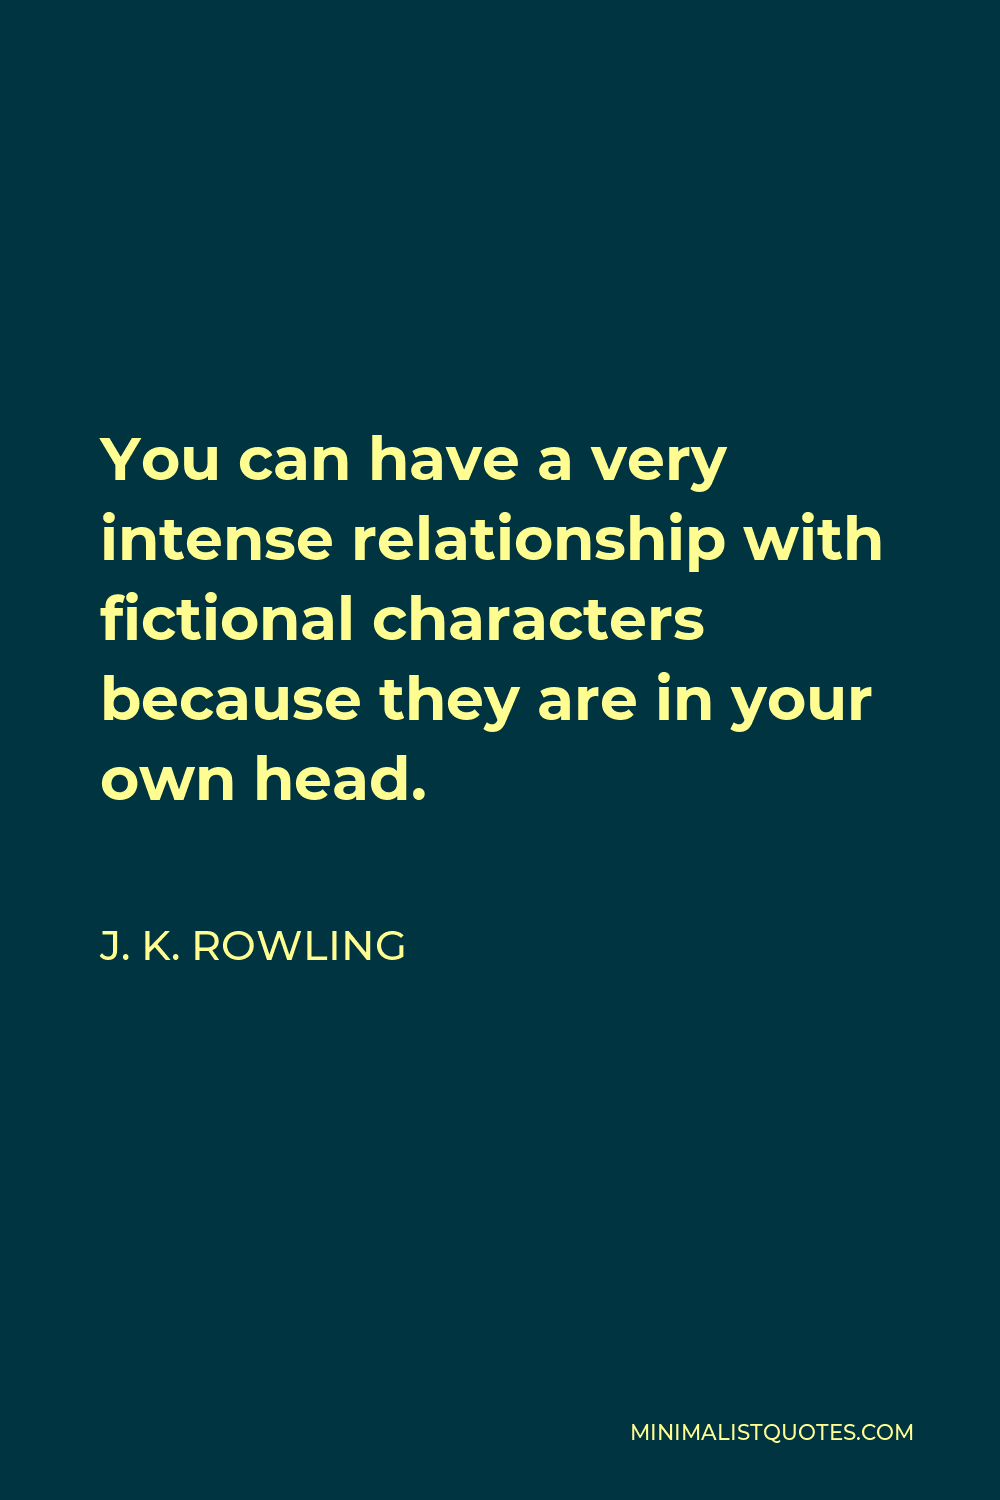 J. K. Rowling Quote - You can have a very intense relationship with fictional characters because they are in your own head.